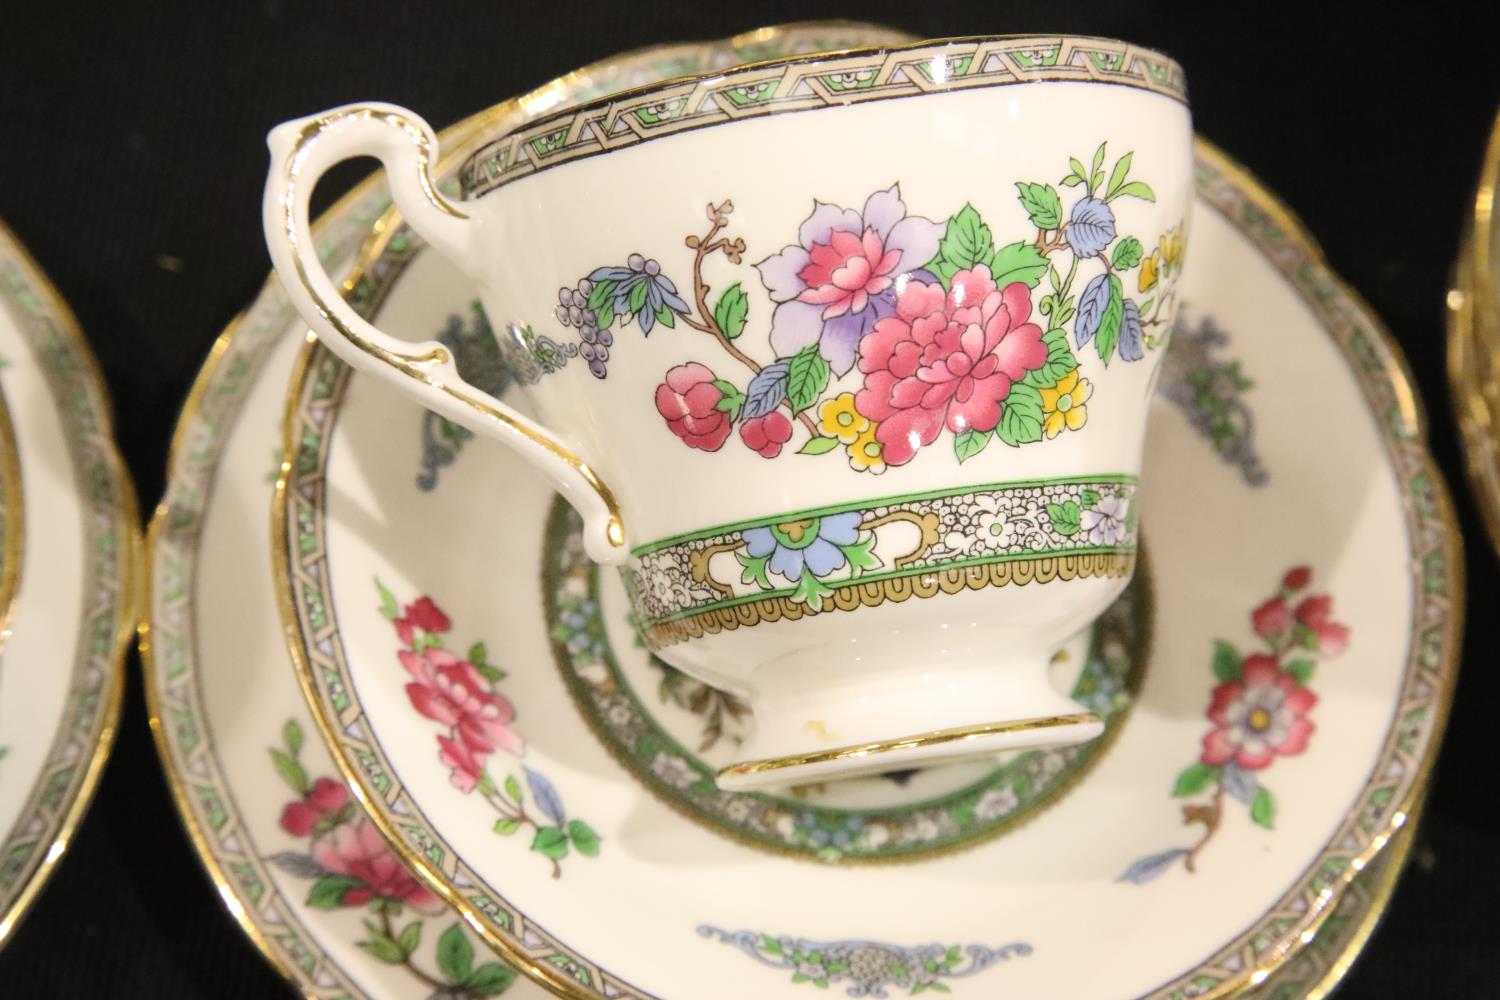 Paragon Tree of Kashmir pattern dinner service including dinner plates, salad plates, bowls cups and - Image 3 of 5